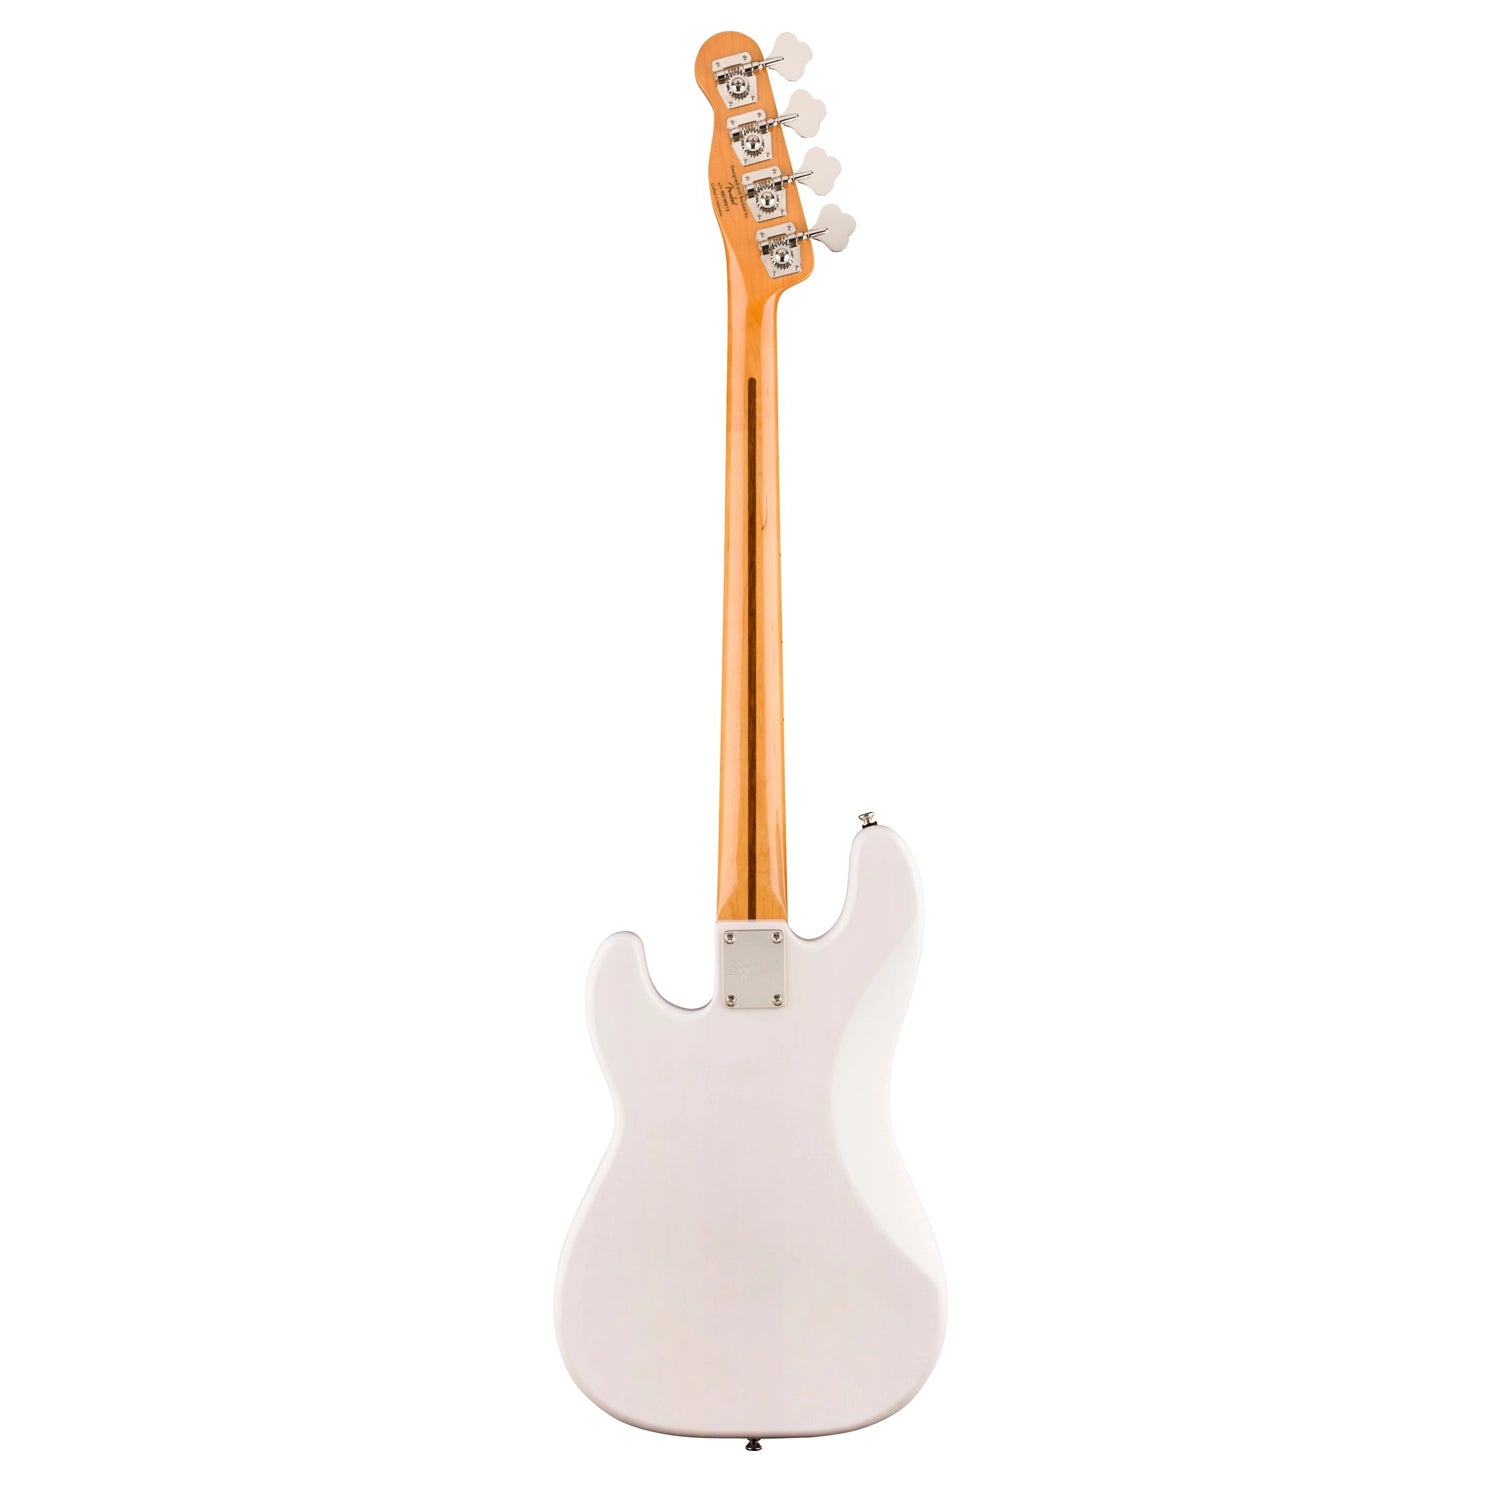 Squier Classic Vibe '50s Precision 4-String Solidbody Bass Guitar - White Blonde